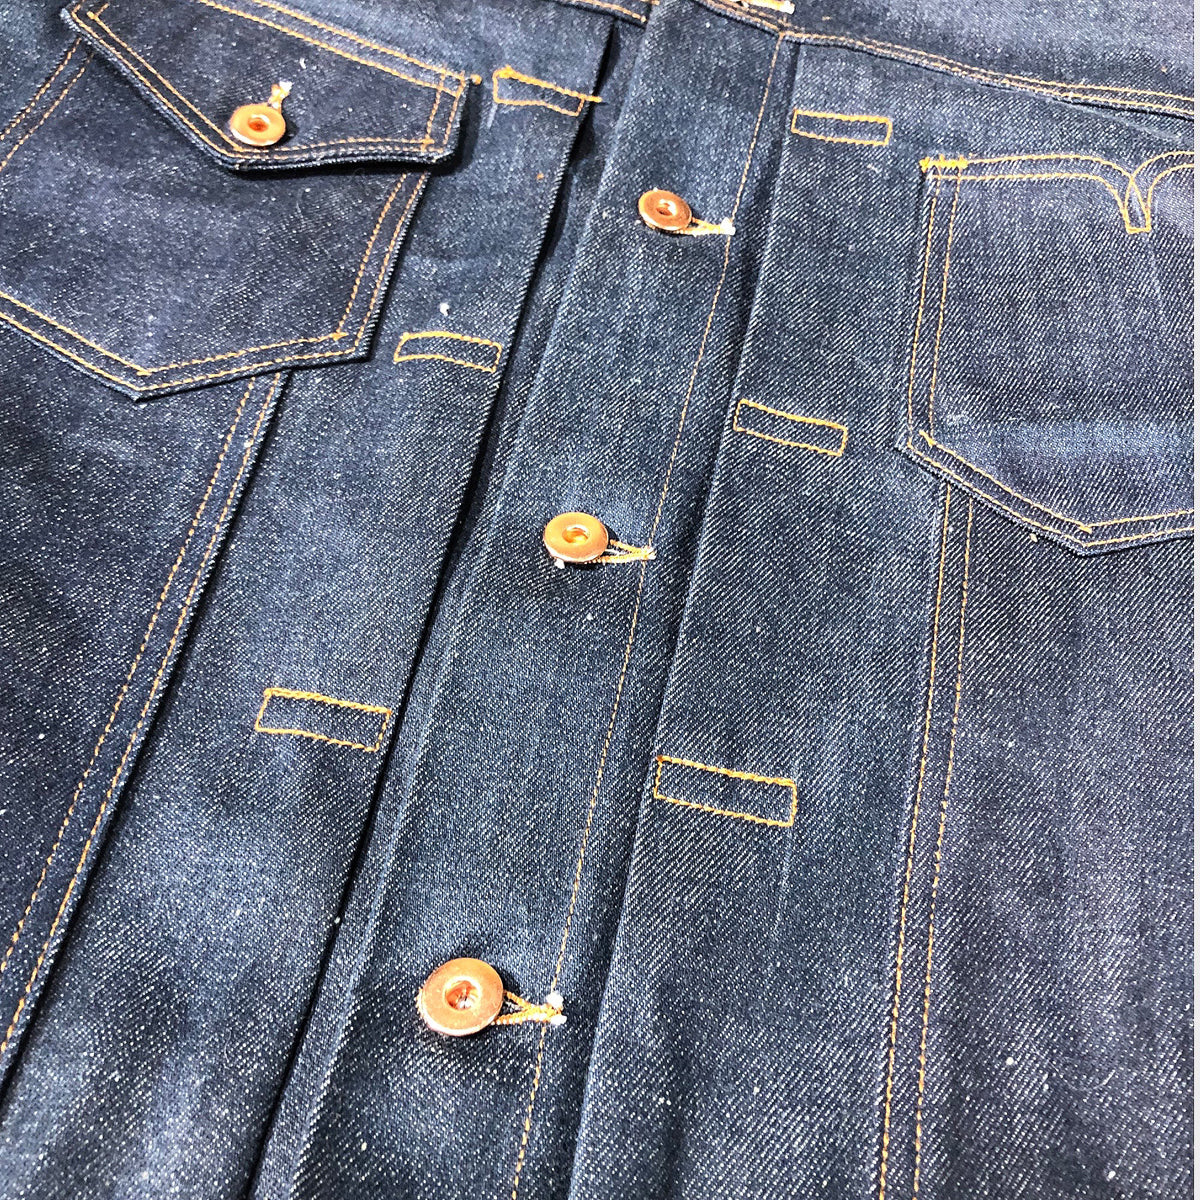 15oz Indigo Cone Mills NATURAL Selvage "TEXAS" Fieldhand Jacket  {Limited Quantities}